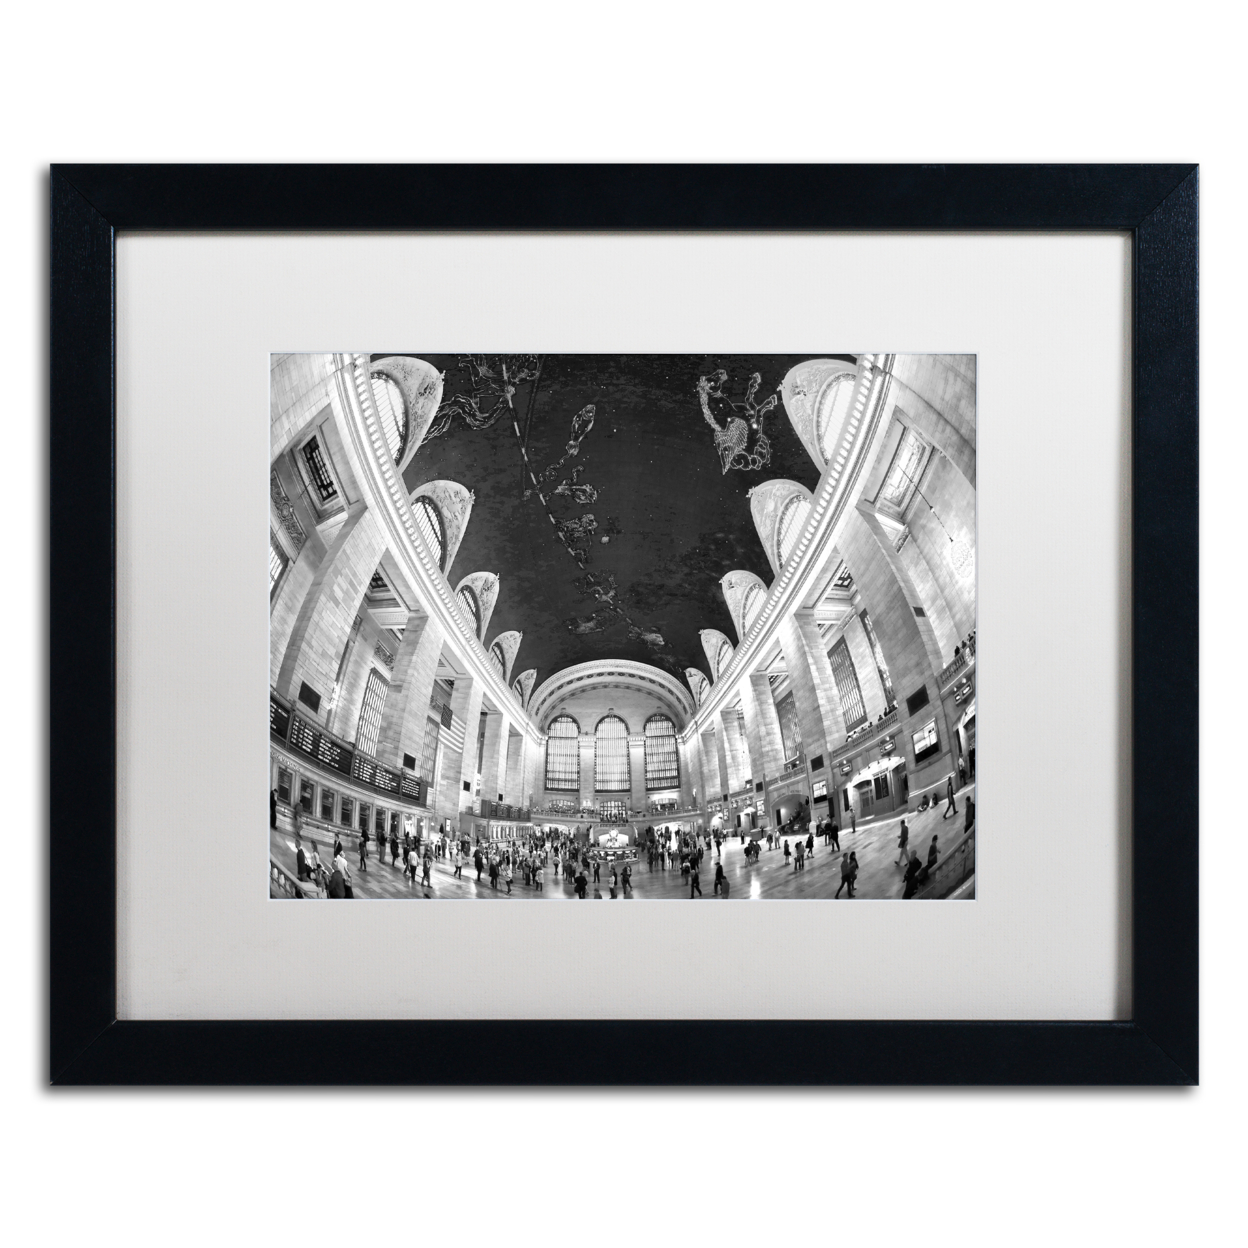 CATeyes 'Grand Station Terminal' Black Wooden Framed Art 18 X 22 Inches